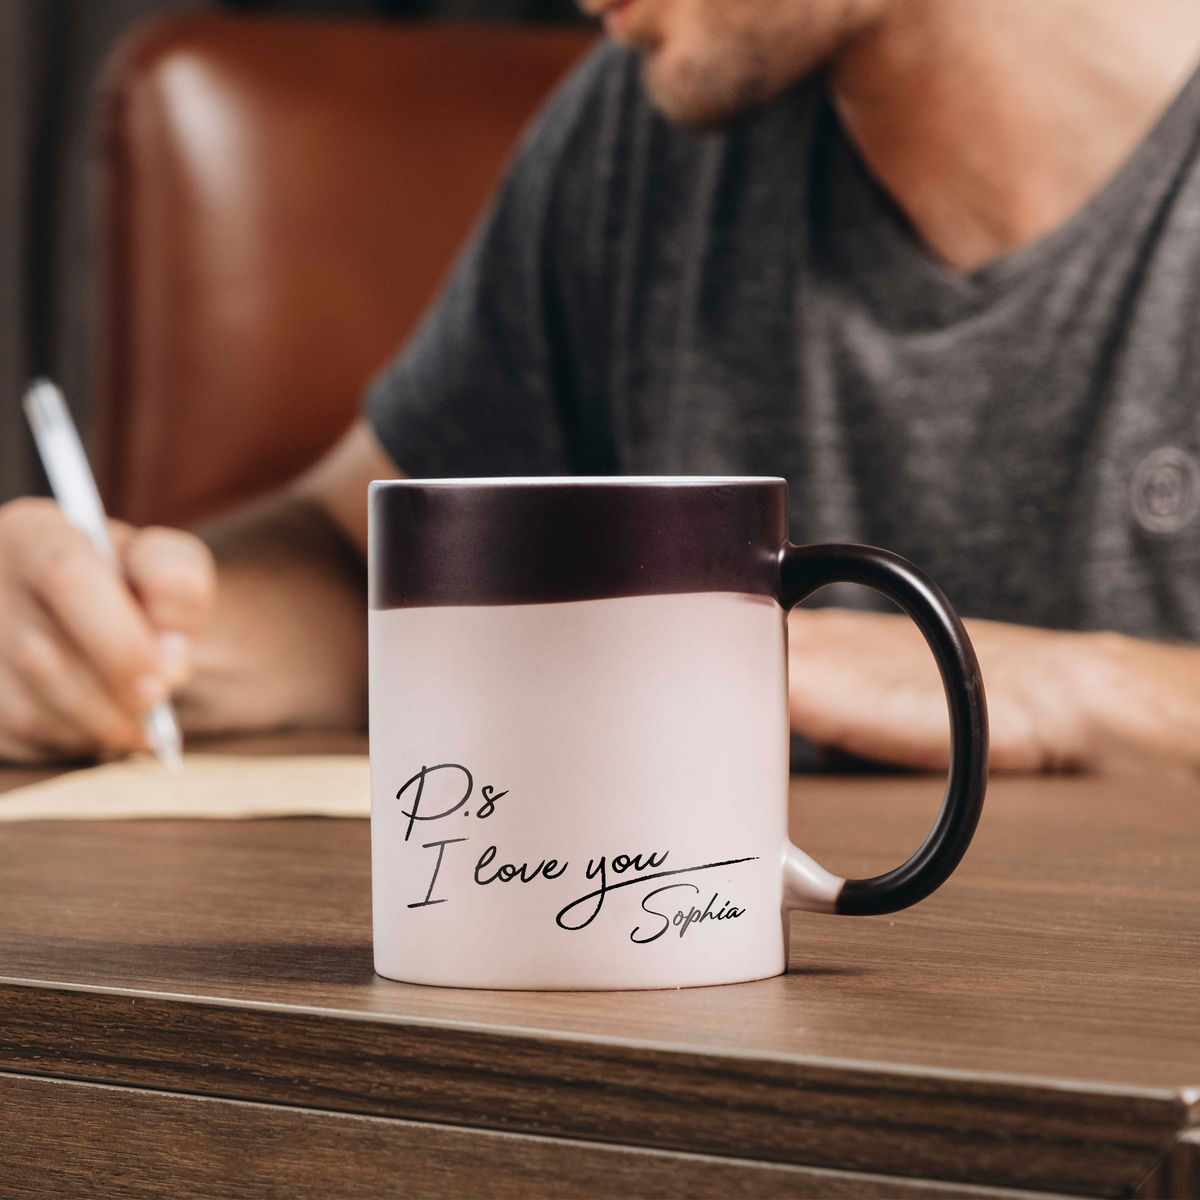 Secret Love Letter - Ps I love you - Magic Mug, Valentine's Day Gifts, Couple Gifts, Gifts For Her, Him